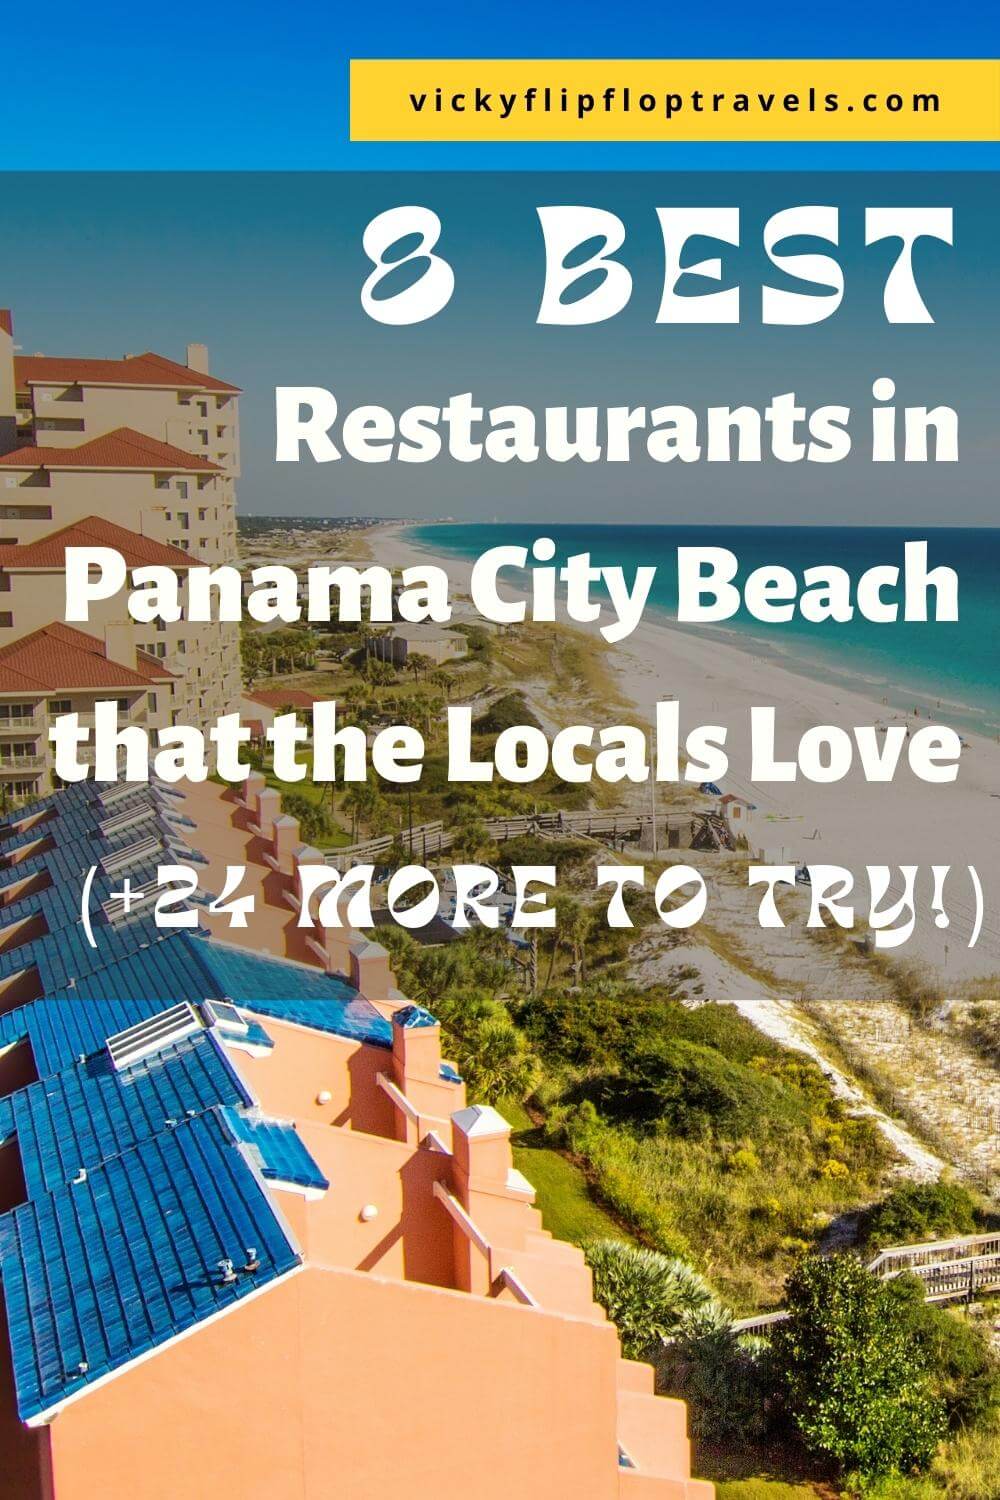 8 Best Restaurants in Panama City Beach that the Locals Love (24 More to Try!)